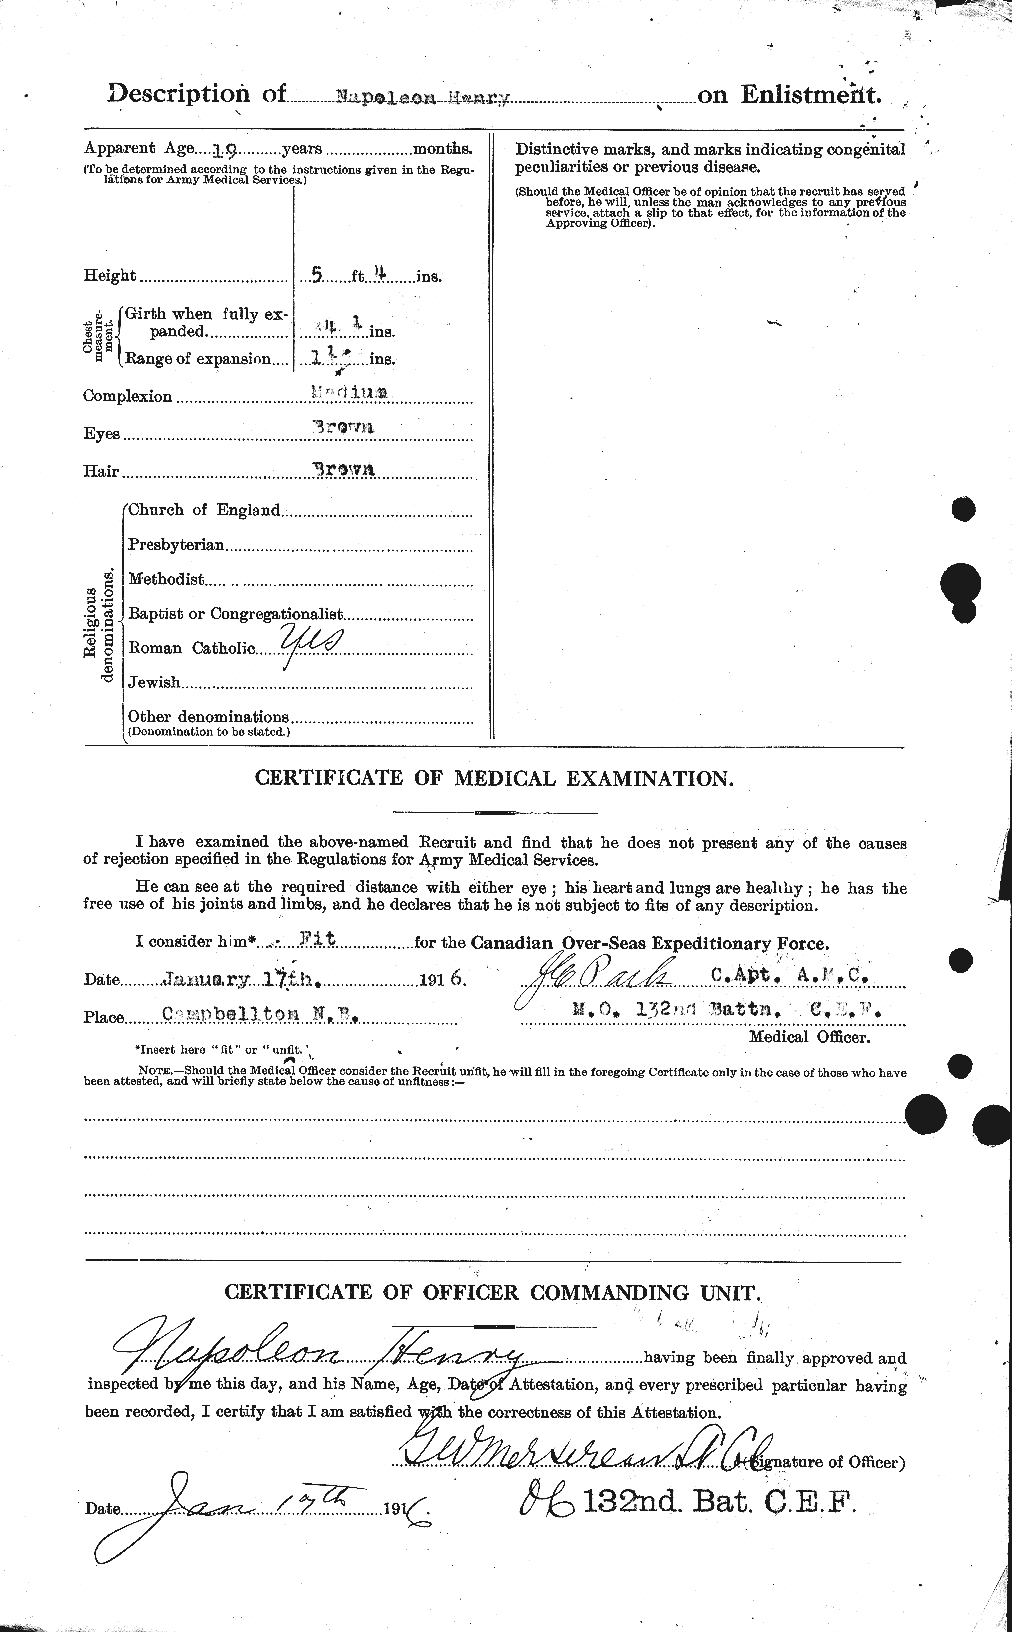 Personnel Records of the First World War - CEF 387669b